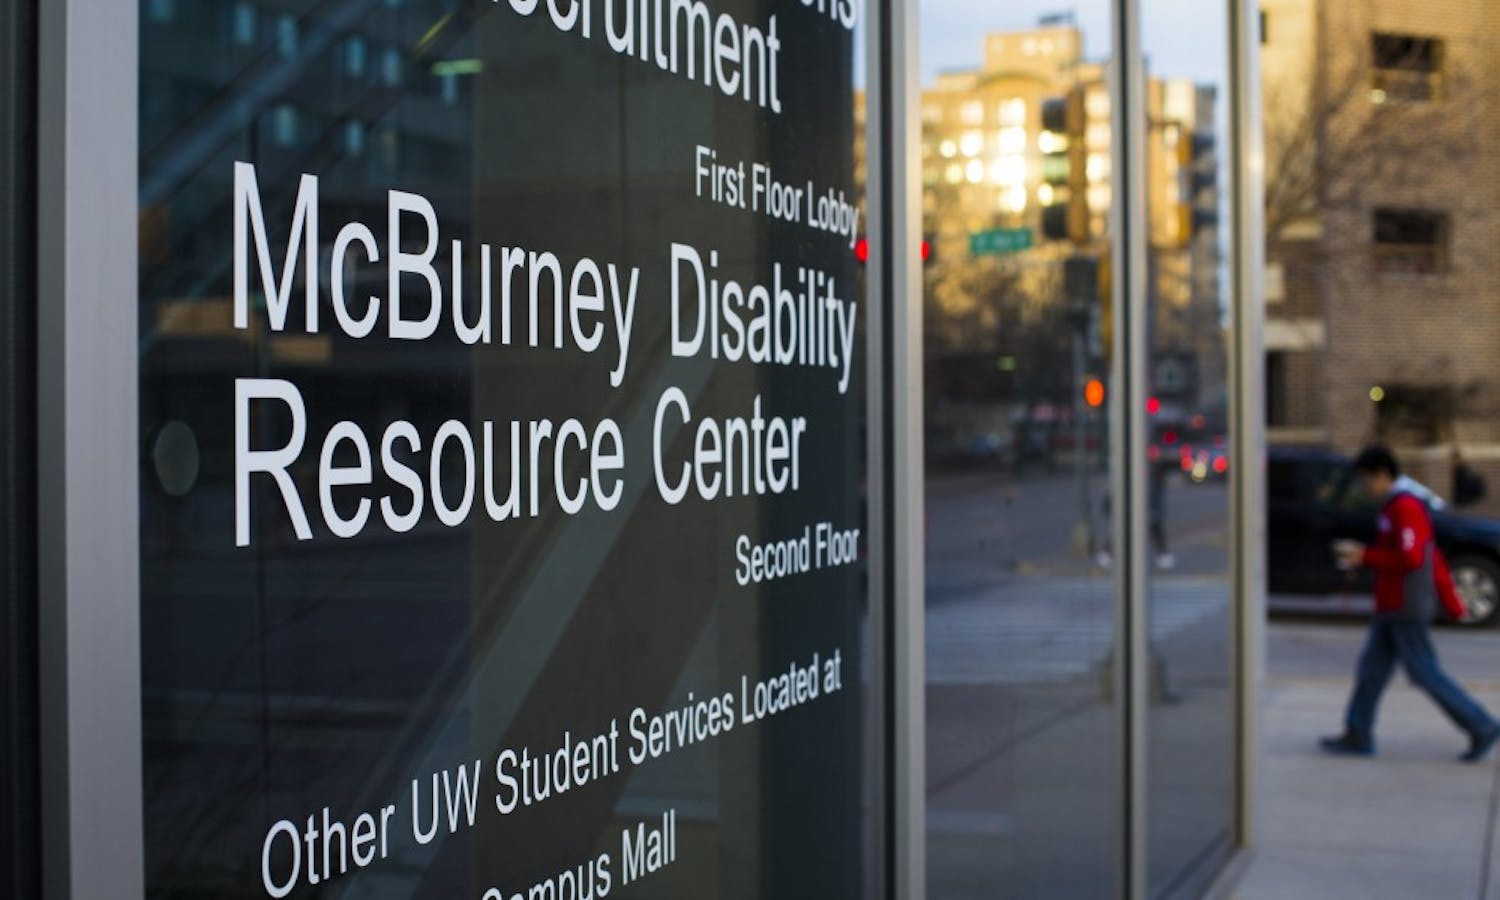 The McBurney Center provides accommodations for many students whose disabilities make the transition to college more difficult.